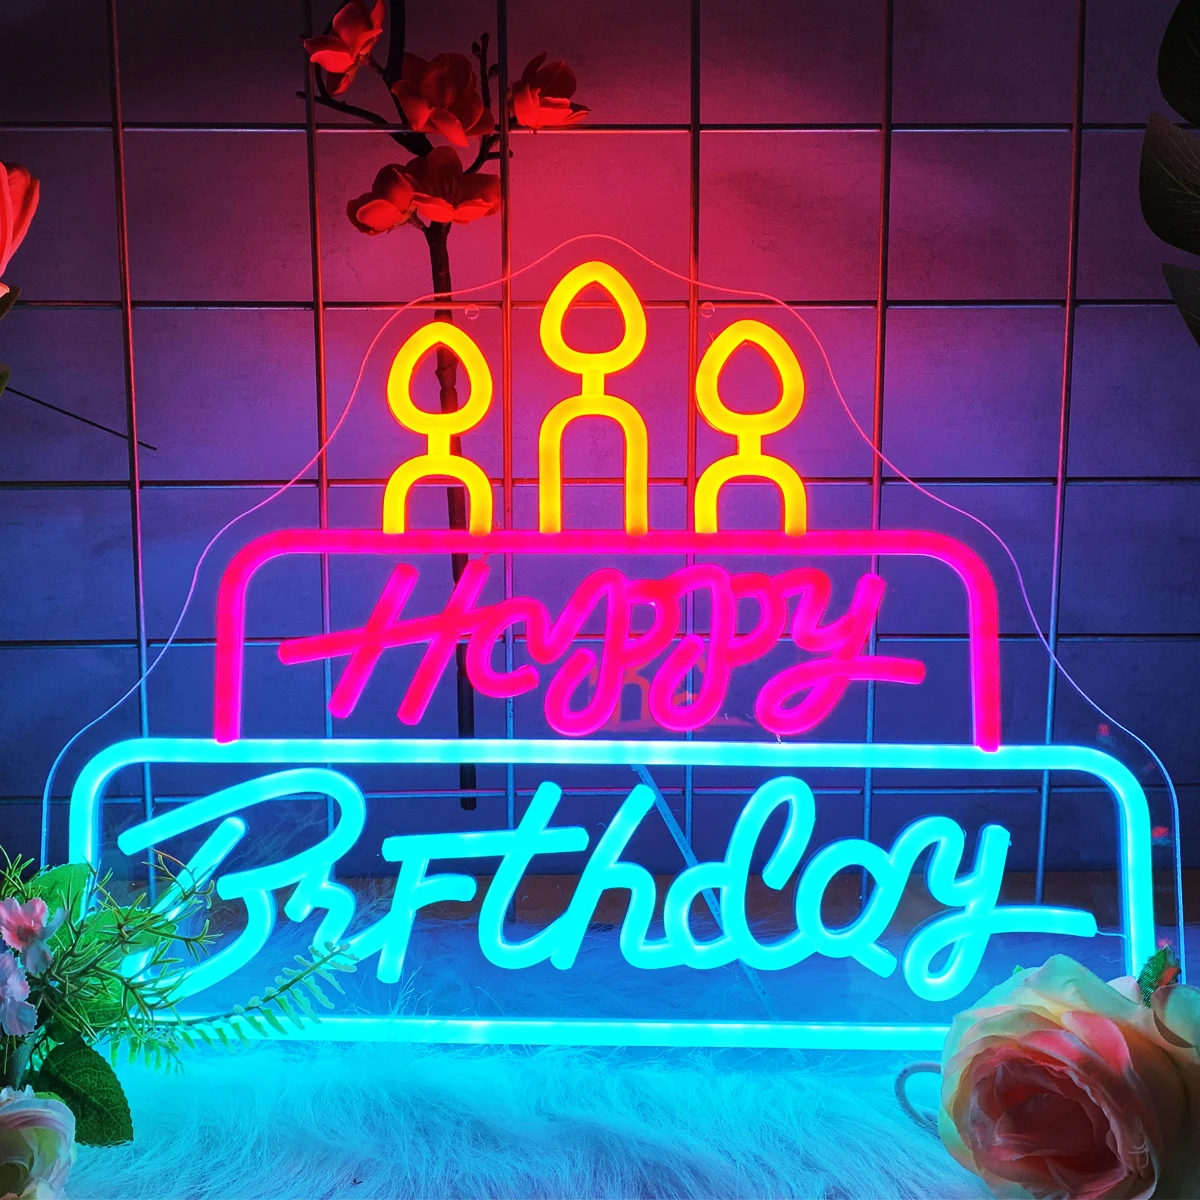 birthday-cake-candles-can-adjust-the-neon-lights-custom-colors-birthday-parties-banquets-bars-neon-birthday-background